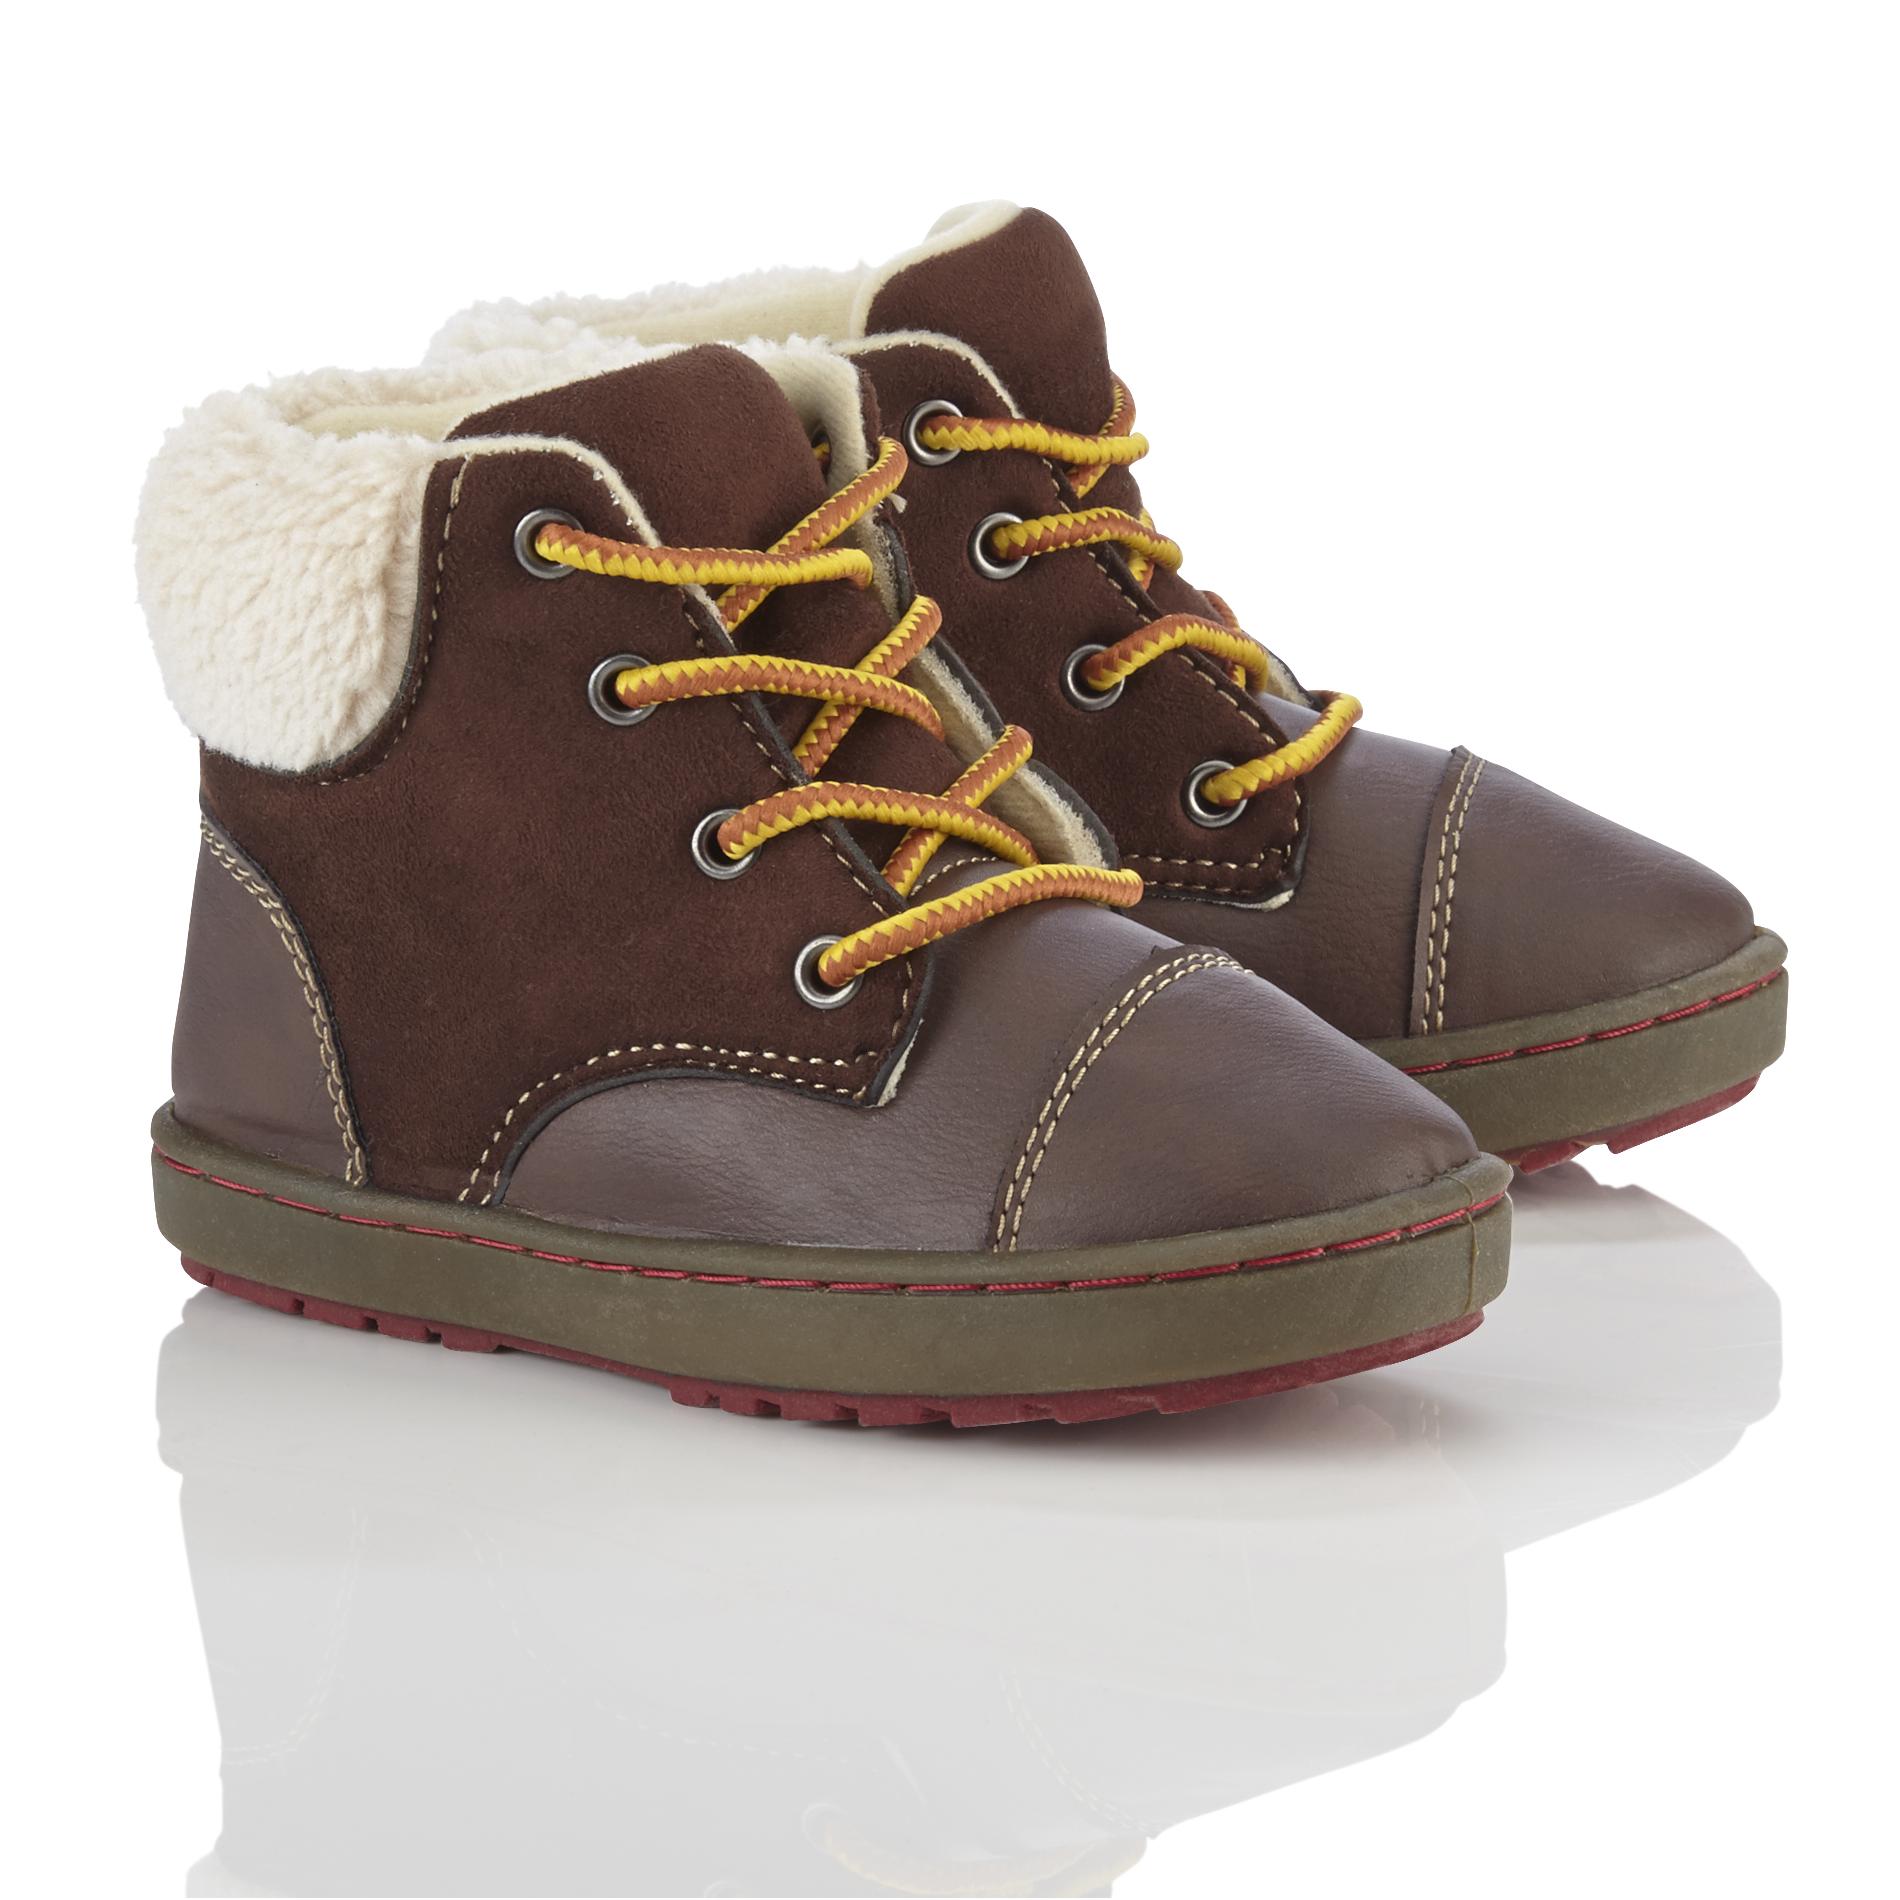 UPC 888737000094 product image for OshKosh Toddler Boy's Eddy Brown Winter Boot - CONNOR-MAPPIN SINGAPORE | upcitemdb.com